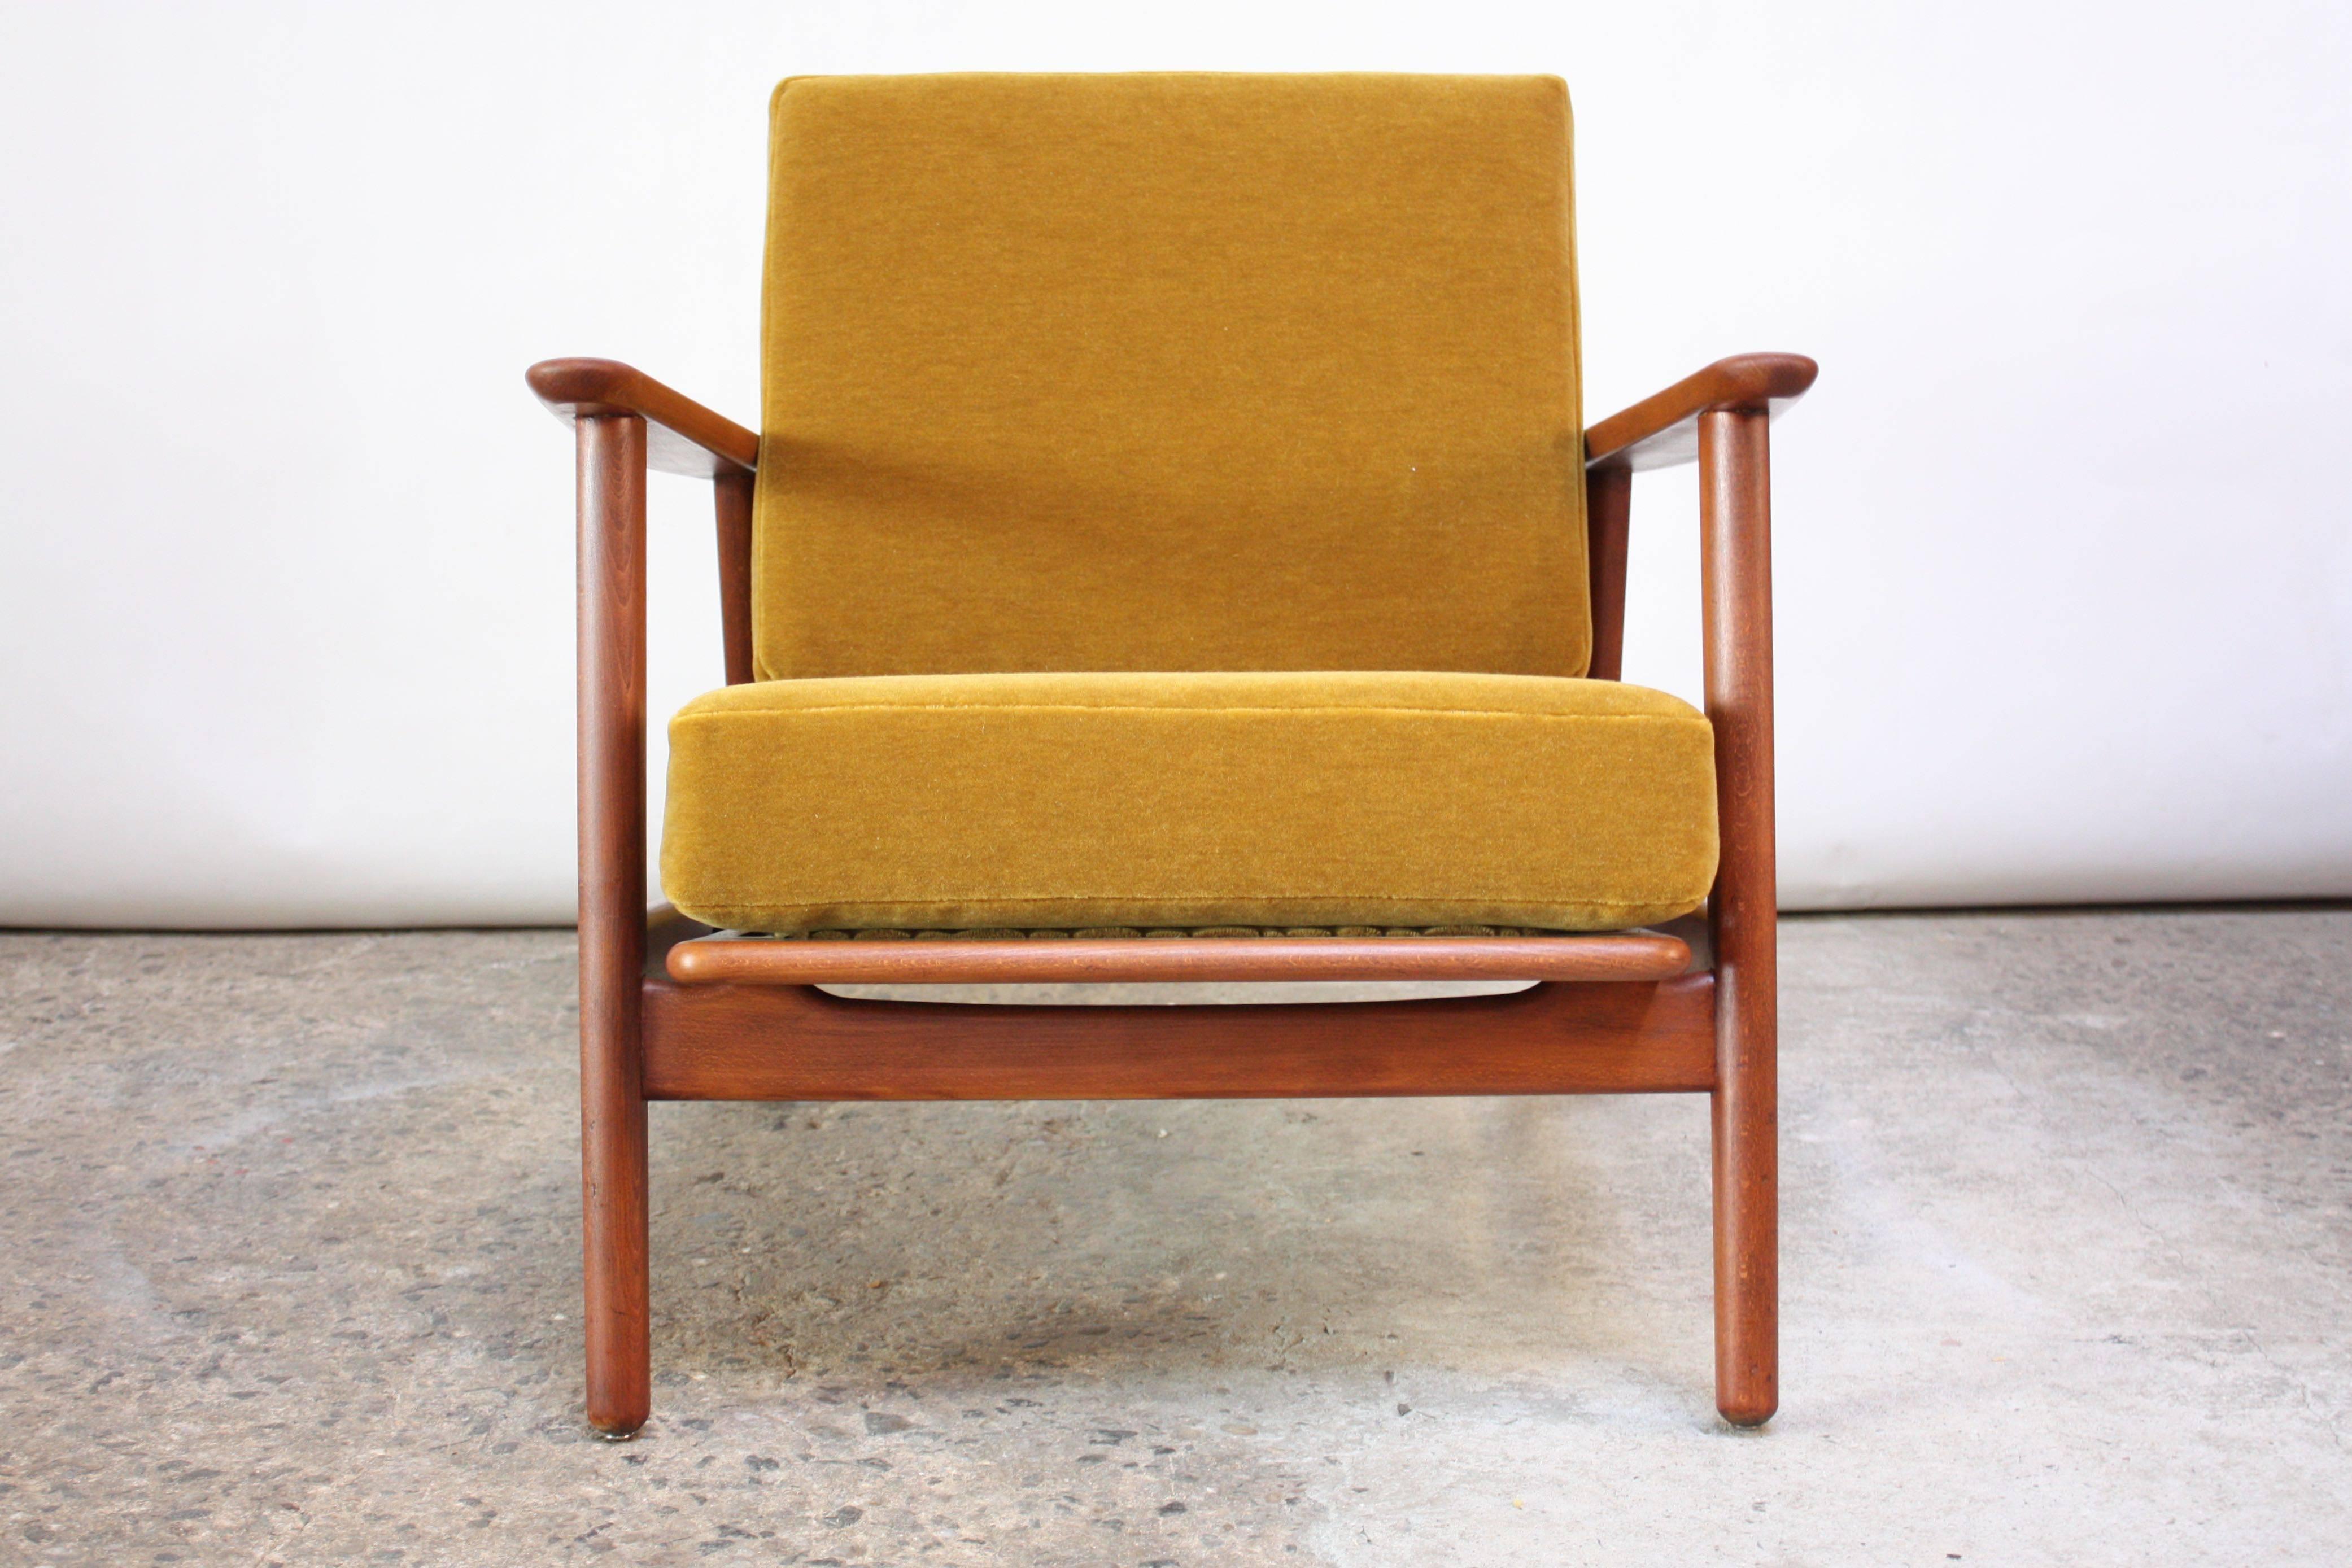 1960s Danish lounge chair with wide, sculptural arms and ochre mohair cushions. Features slight reclining function (the seat only leans back an additional 2